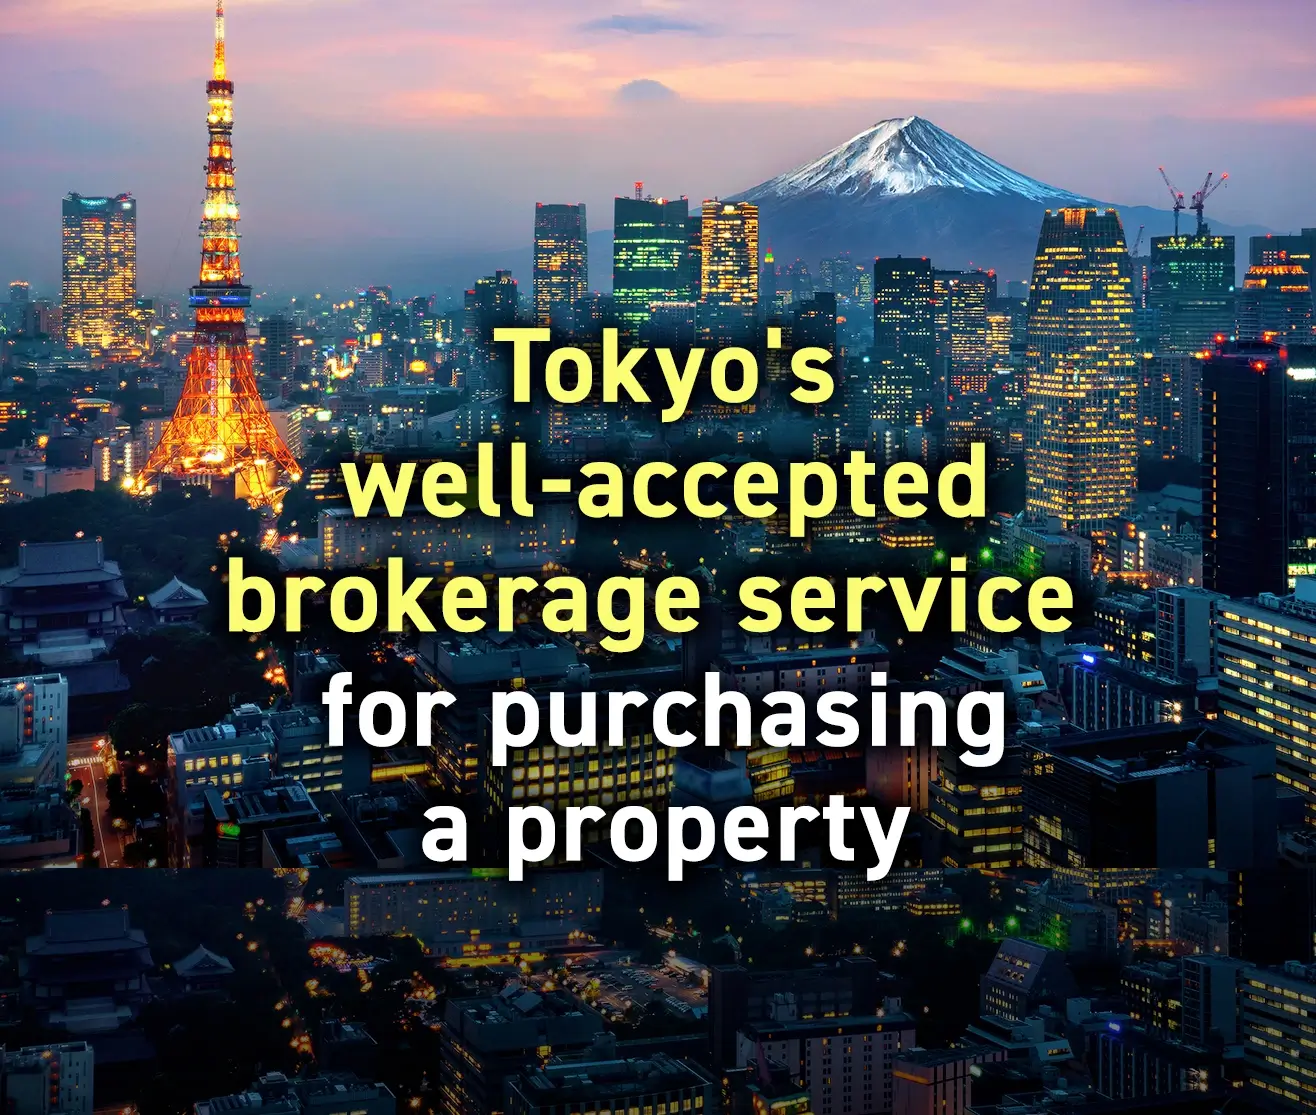 Tokyo's well-accepted brokerage service for purchasing a property